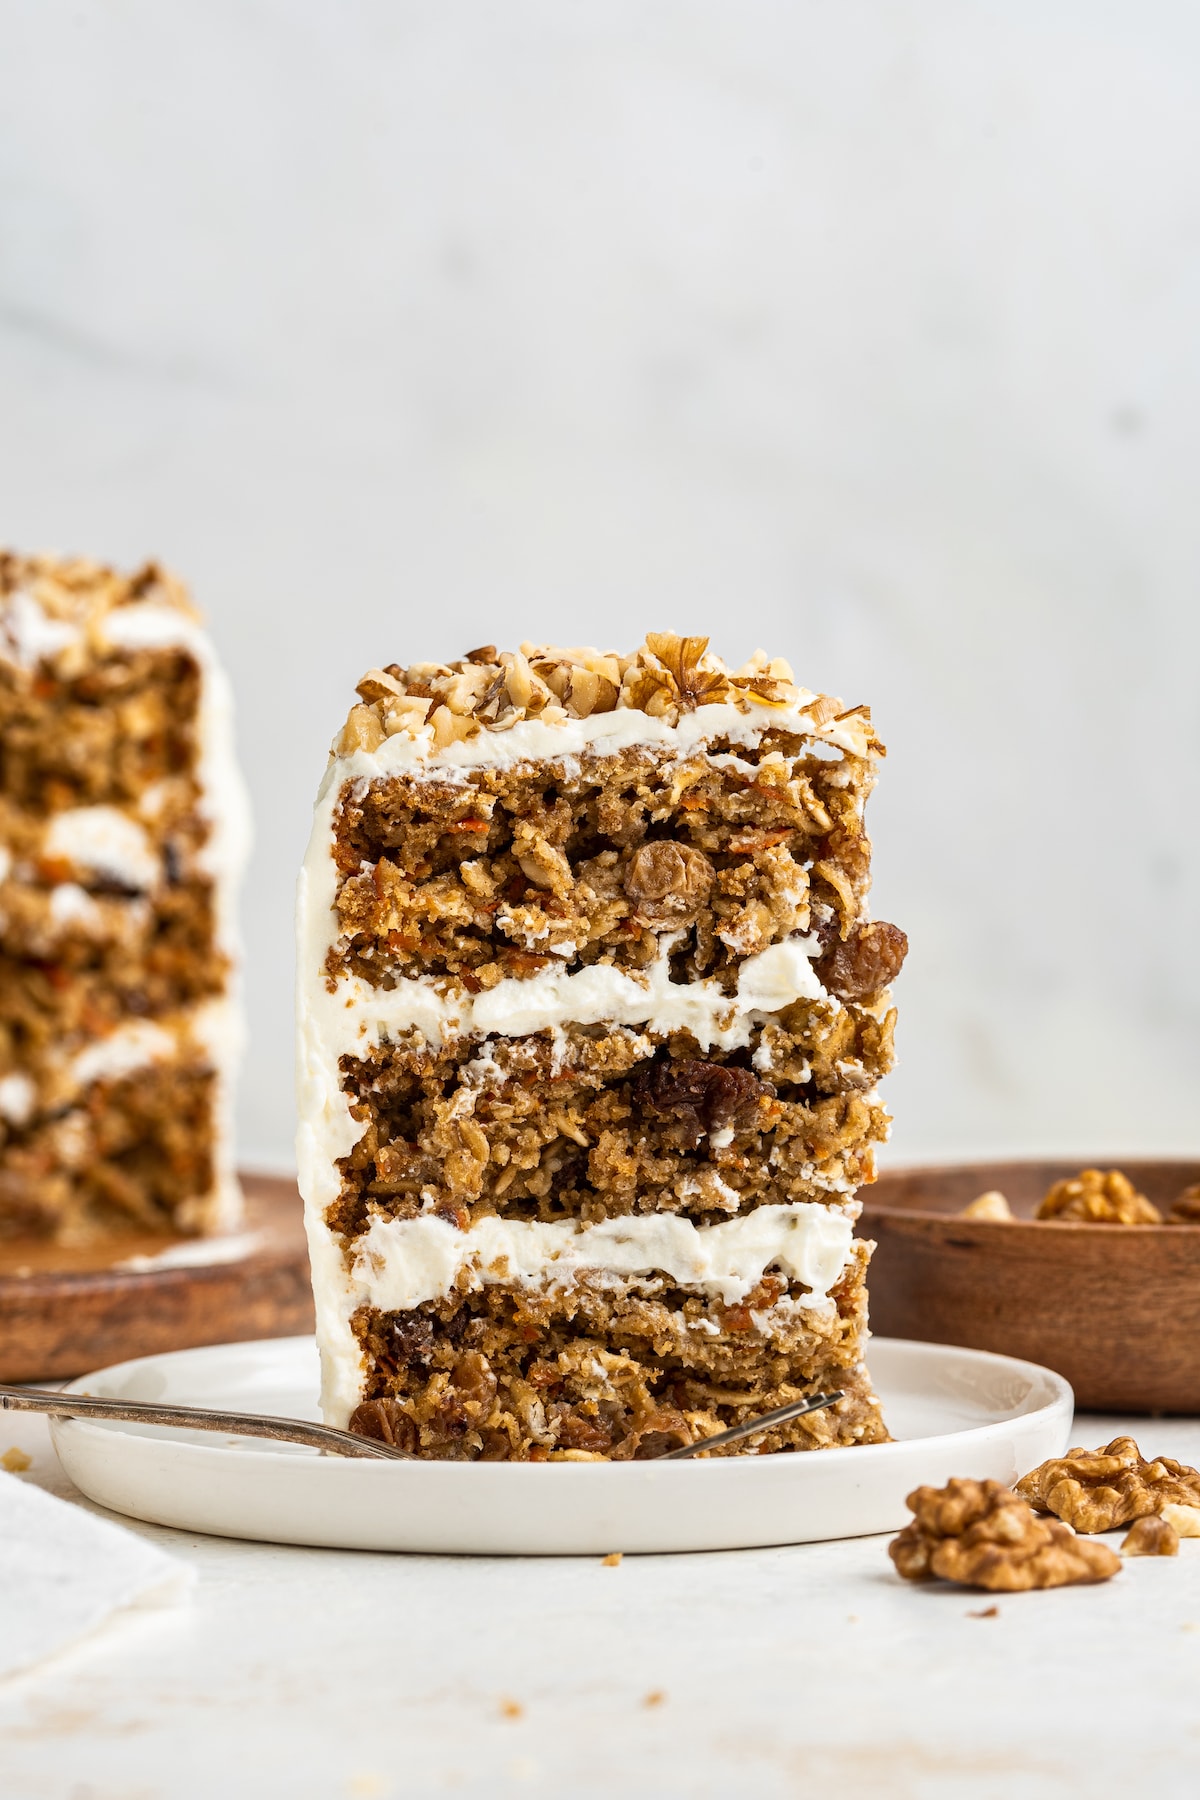 A slice of a 3-layer oatmeal carrot cake standing up vertical on a white plate.